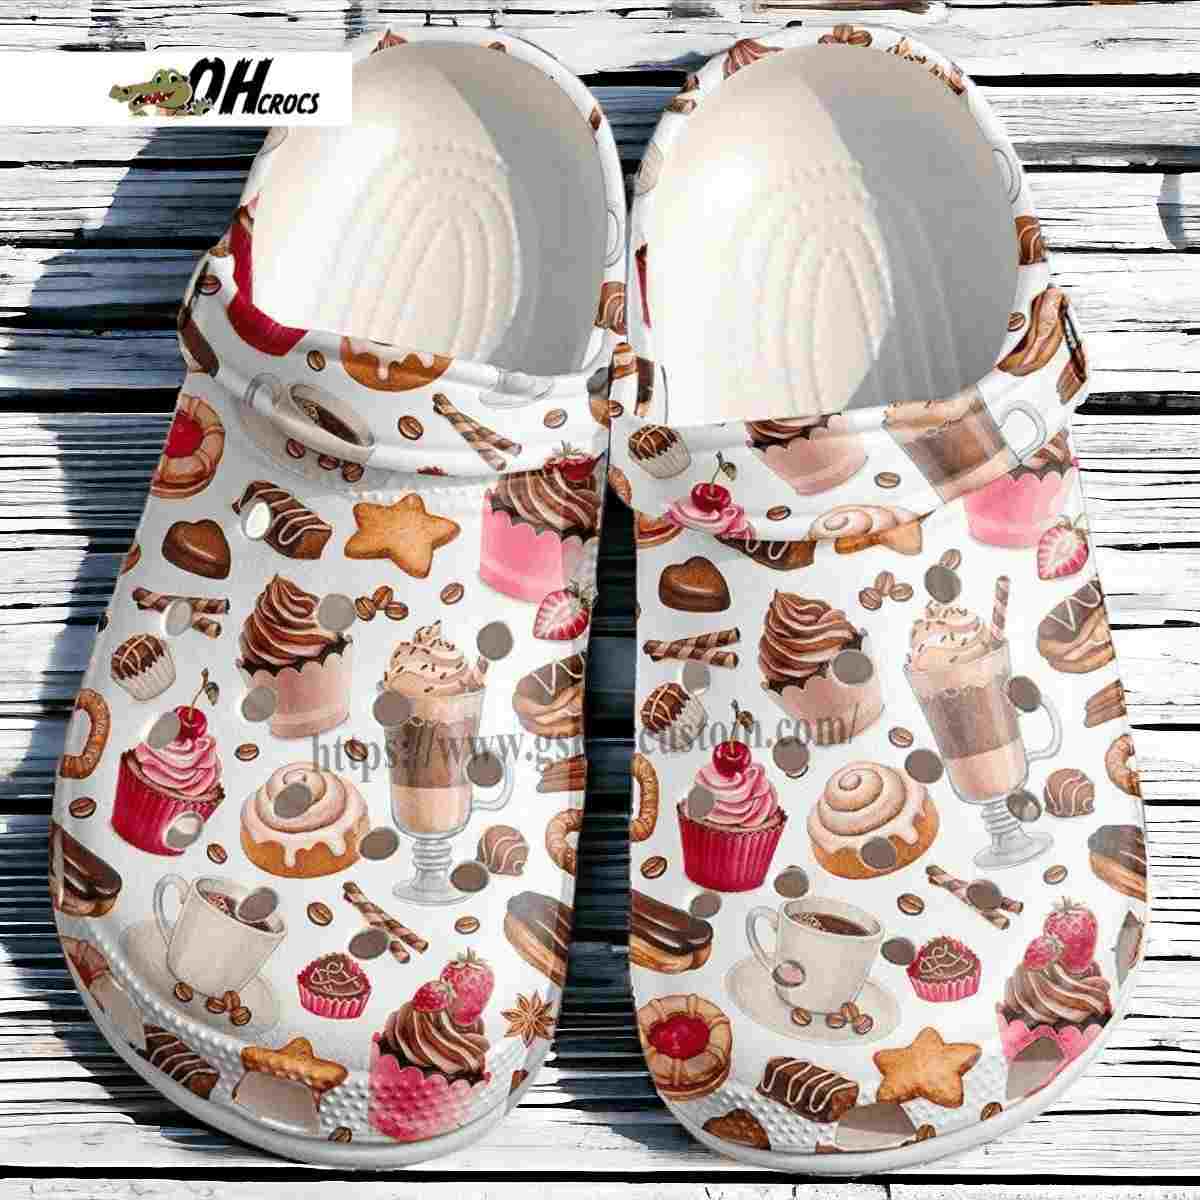 Coffee Cake Milk Tea Party Crocs Shoes Gift Sweet Lover Girl Kitchen Cake Baking Shoes Croc Clogs Mother Day Gift Gift